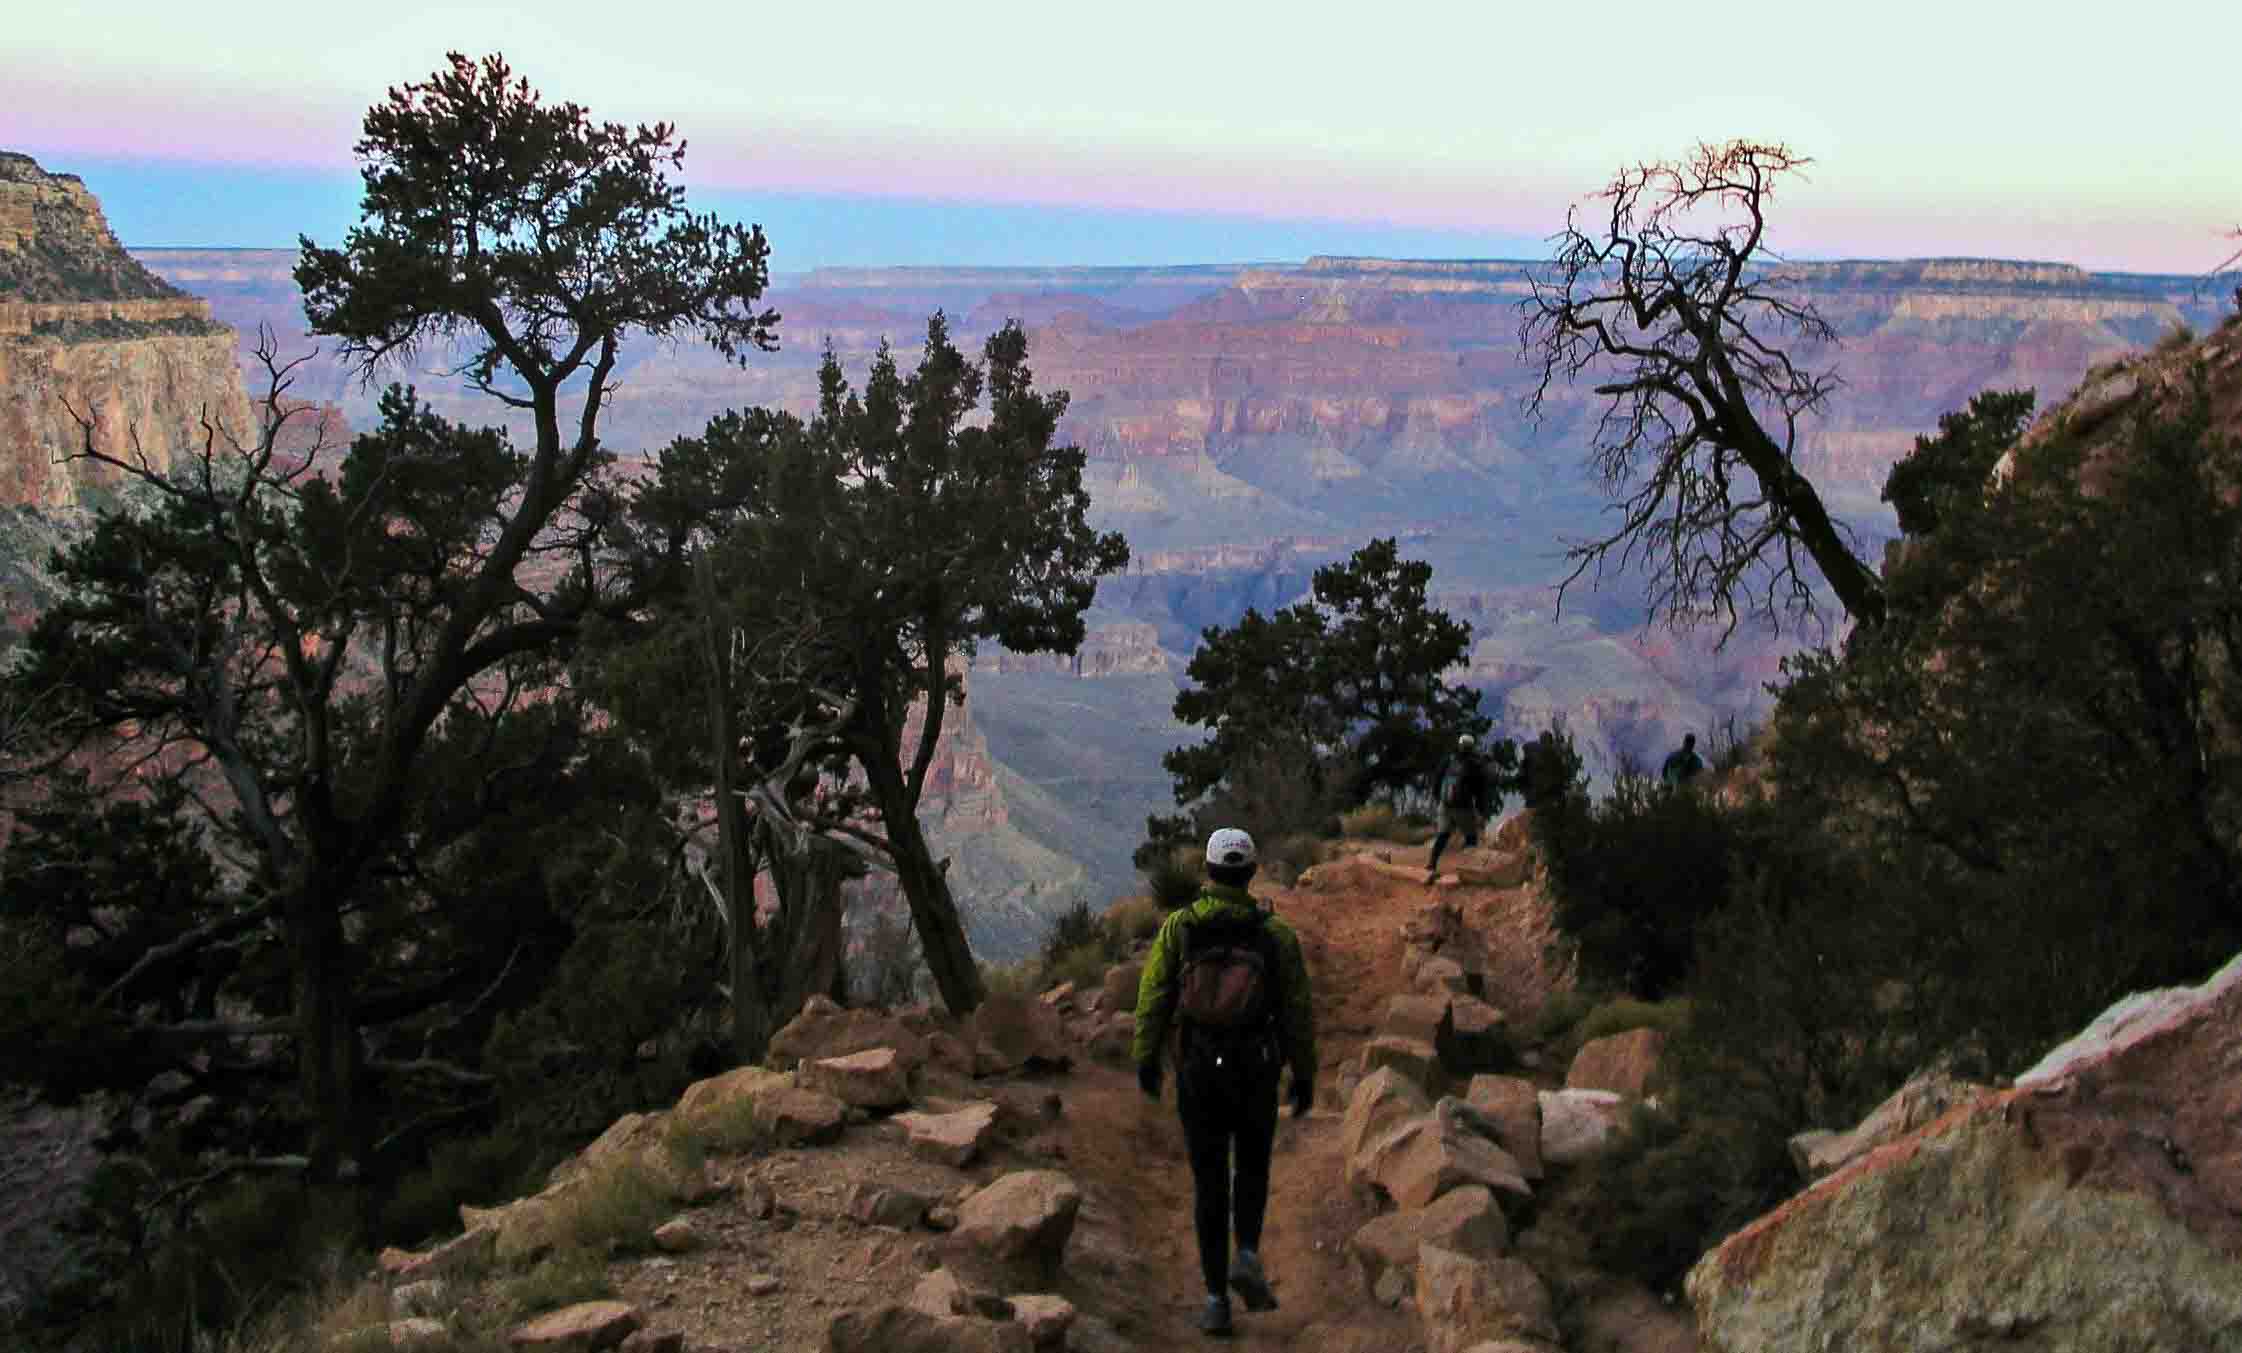 A dawn start - heading back to the North Rim